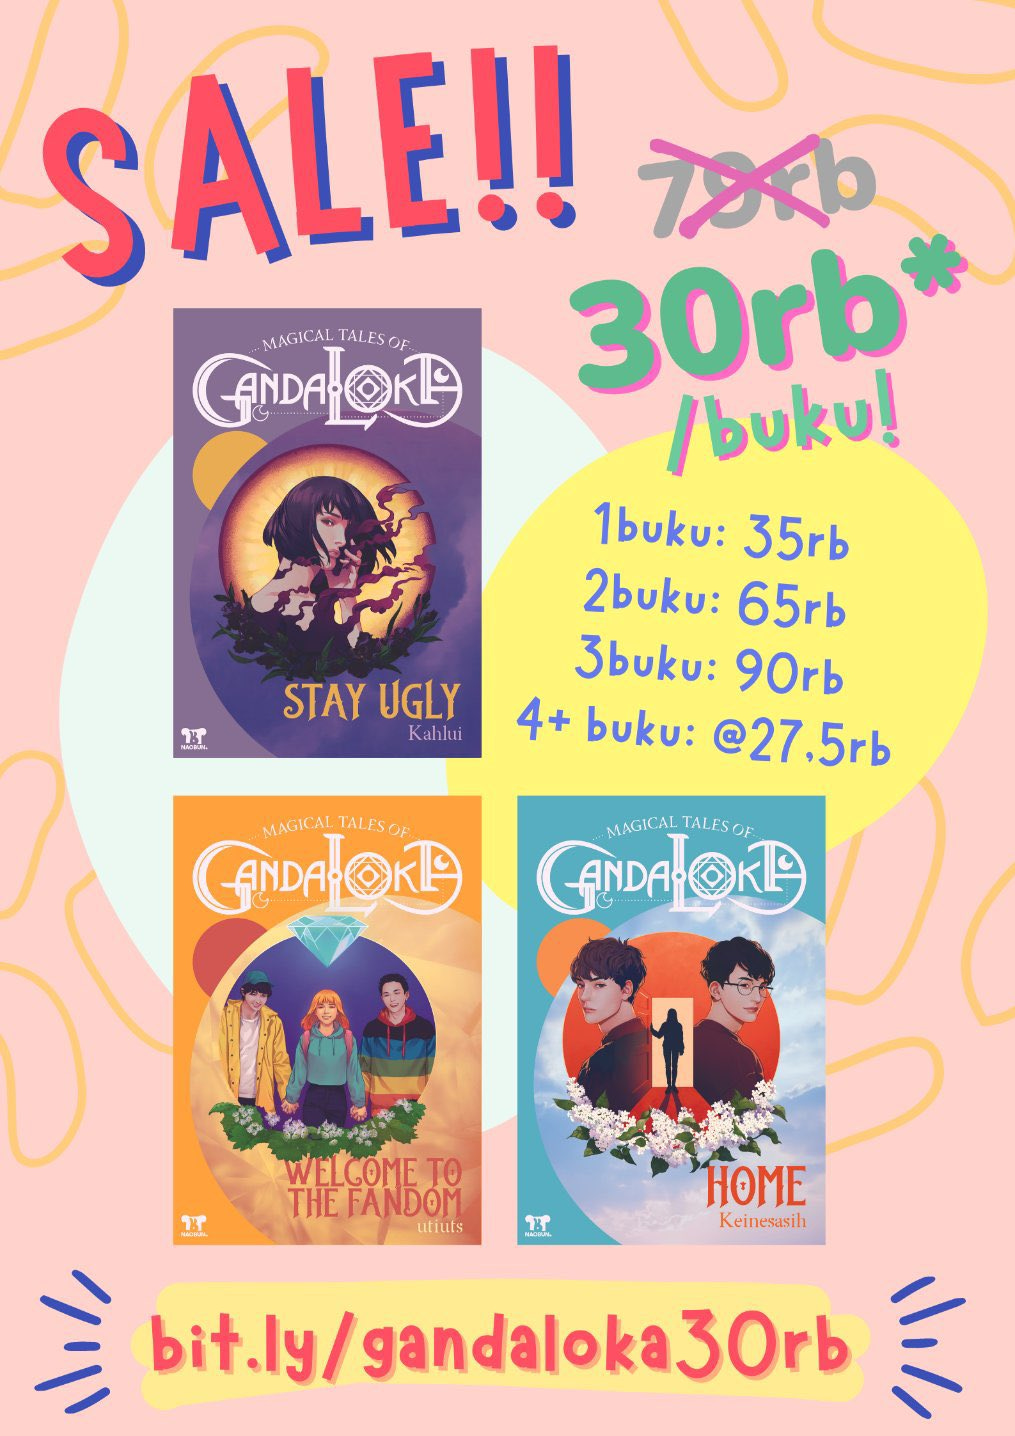 Sale for Magical Tales of Gandaloka: Home, Stay Ugly, and Welcome to the Fandom. One book is Rp35,000. Two books is Rp65,000. Three books is Rp90,000. More than four books is Rp27,500 each.